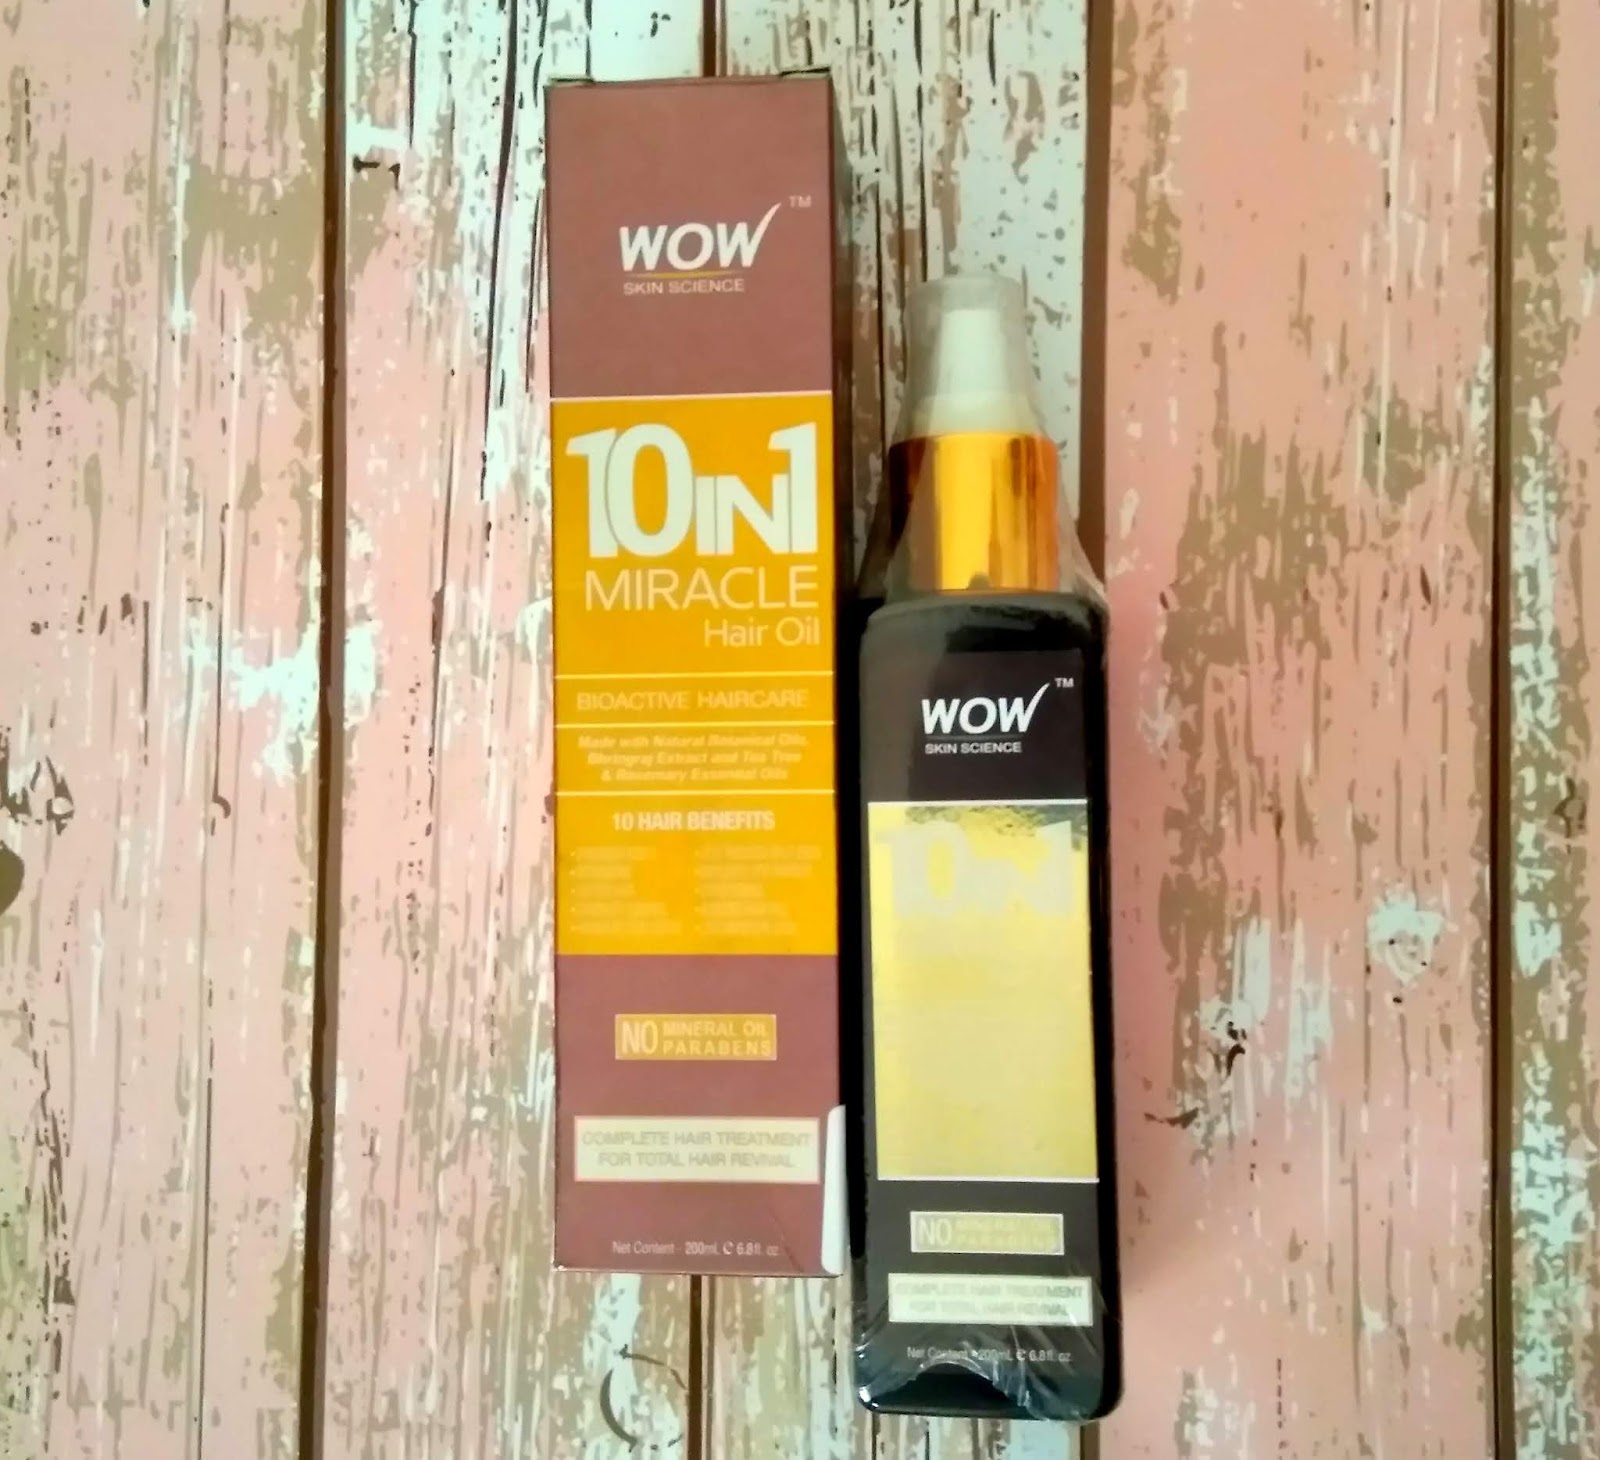 Wow Skin Science Onion Black Seed Hair Oil 50 ml Price Uses Side Effects  Composition  Apollo Pharmacy